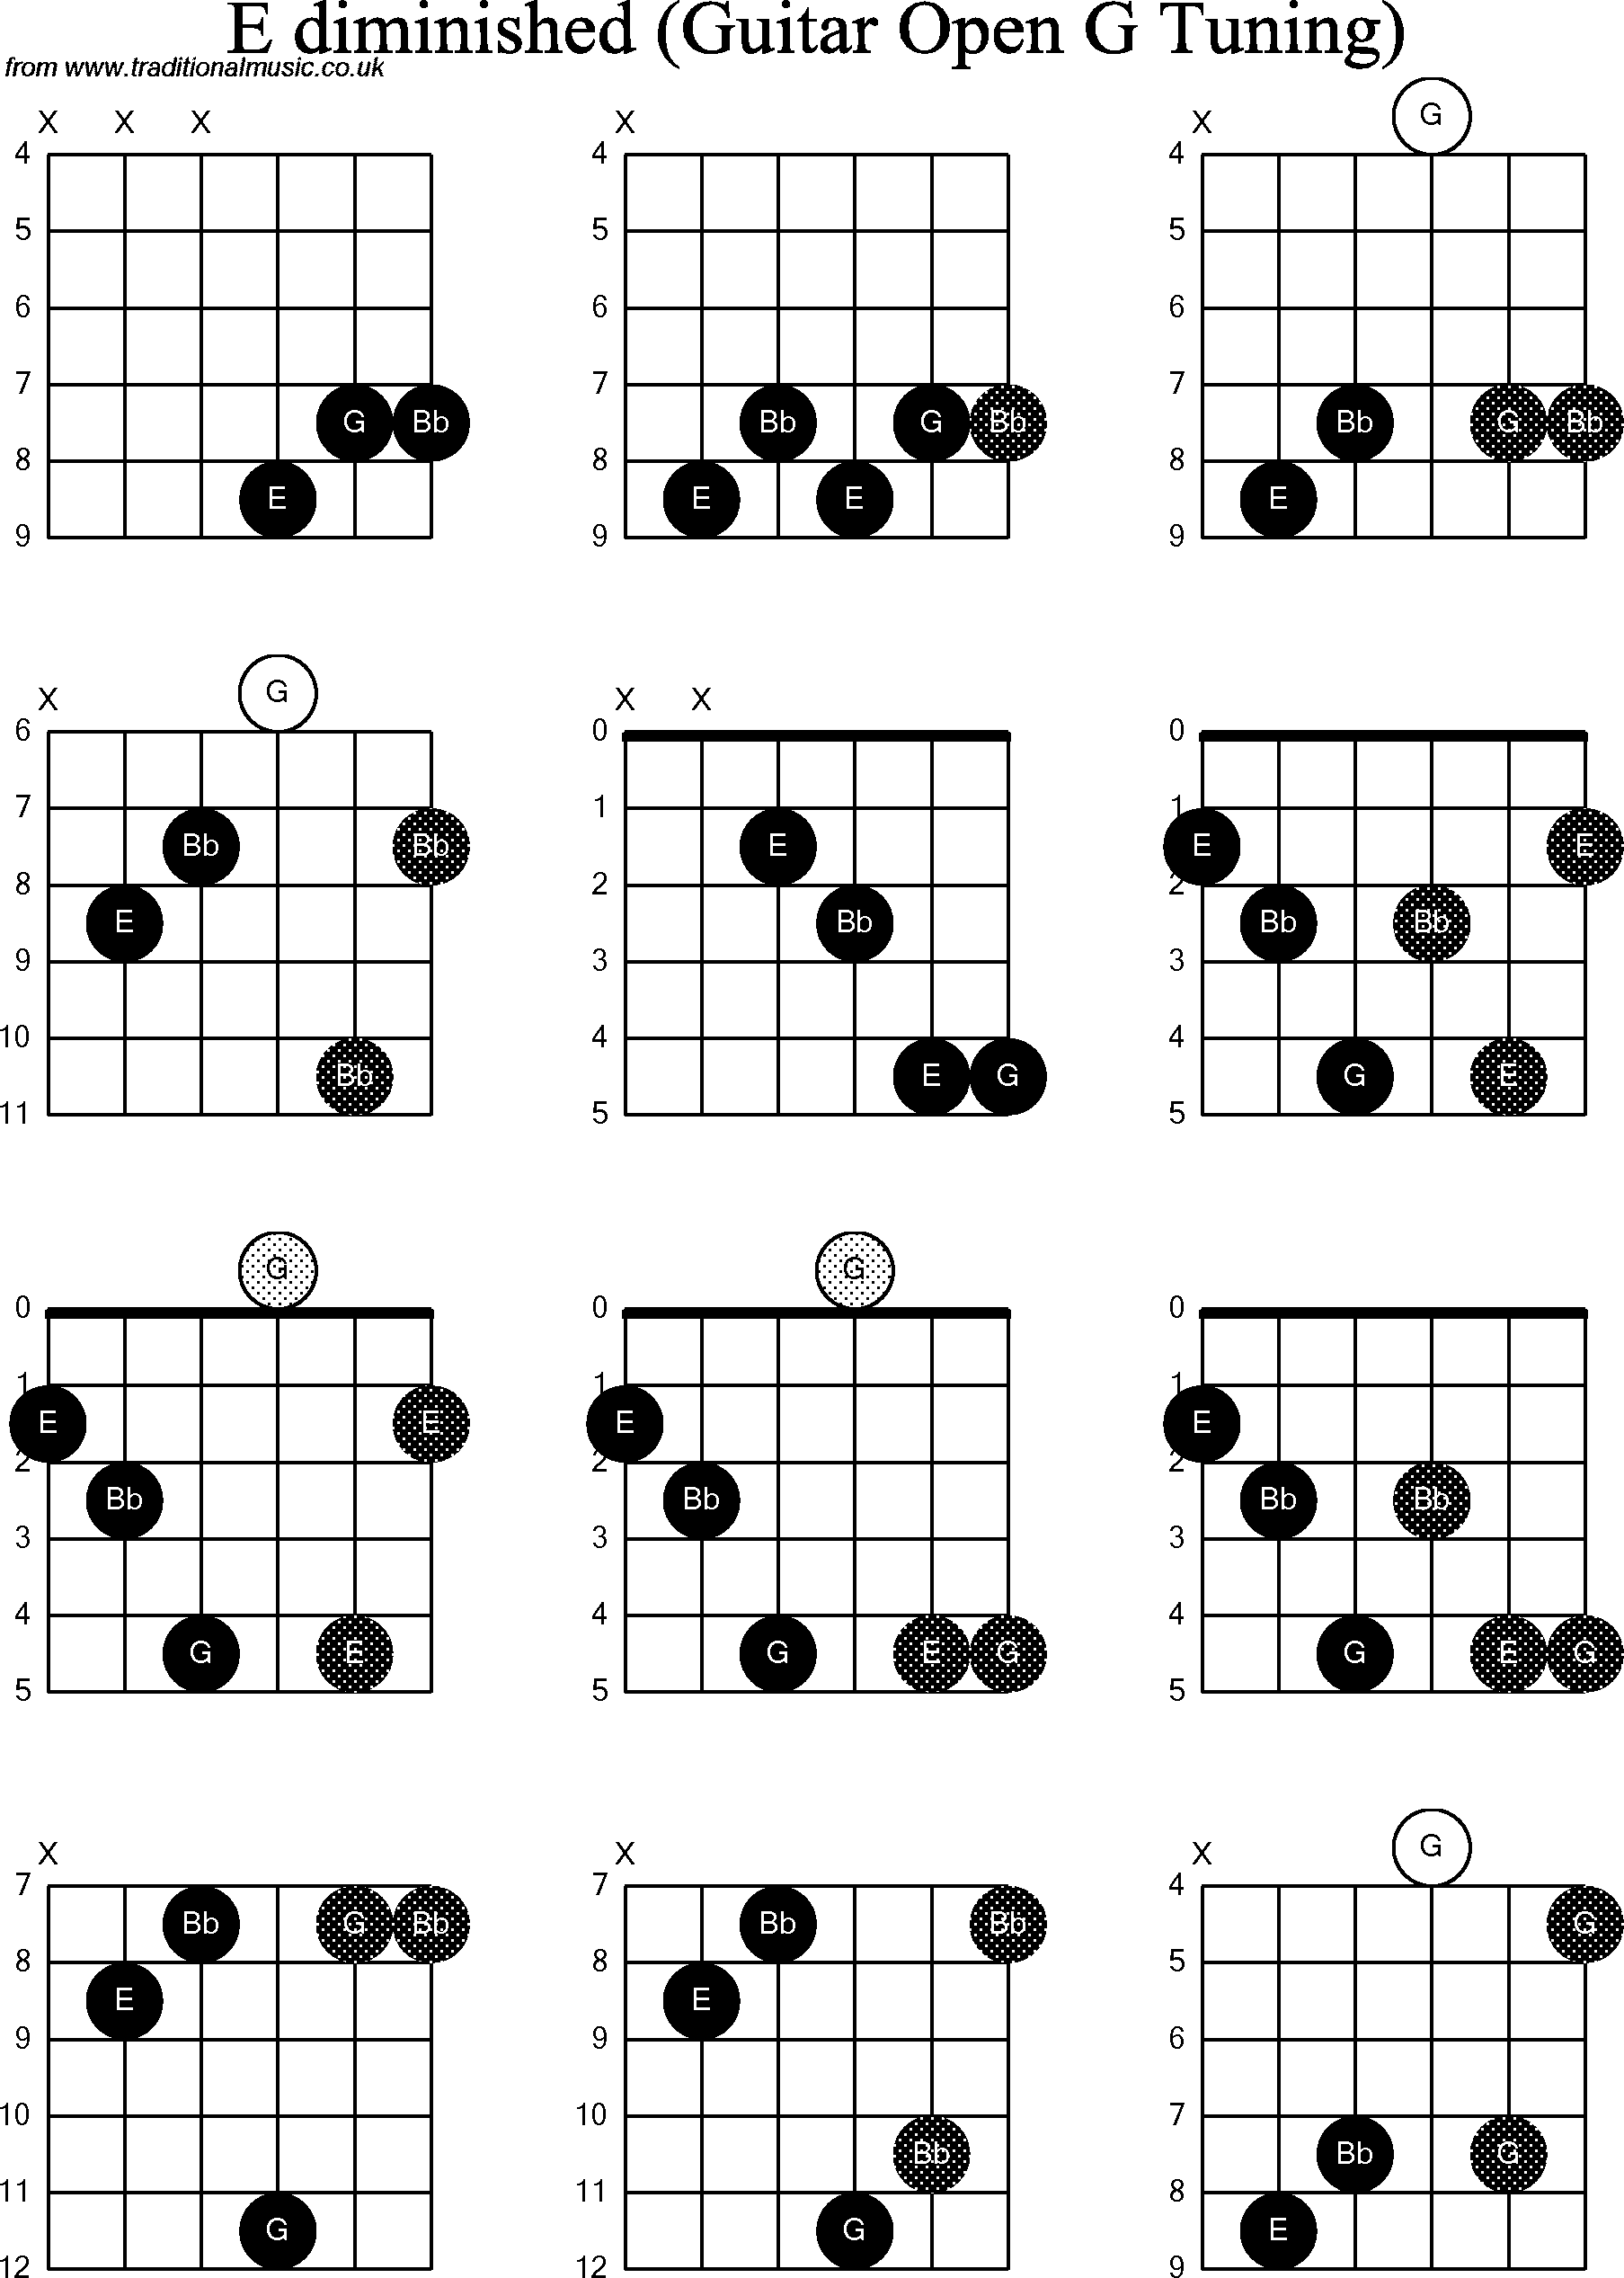 Chord diagrams for Dobro E Diminished